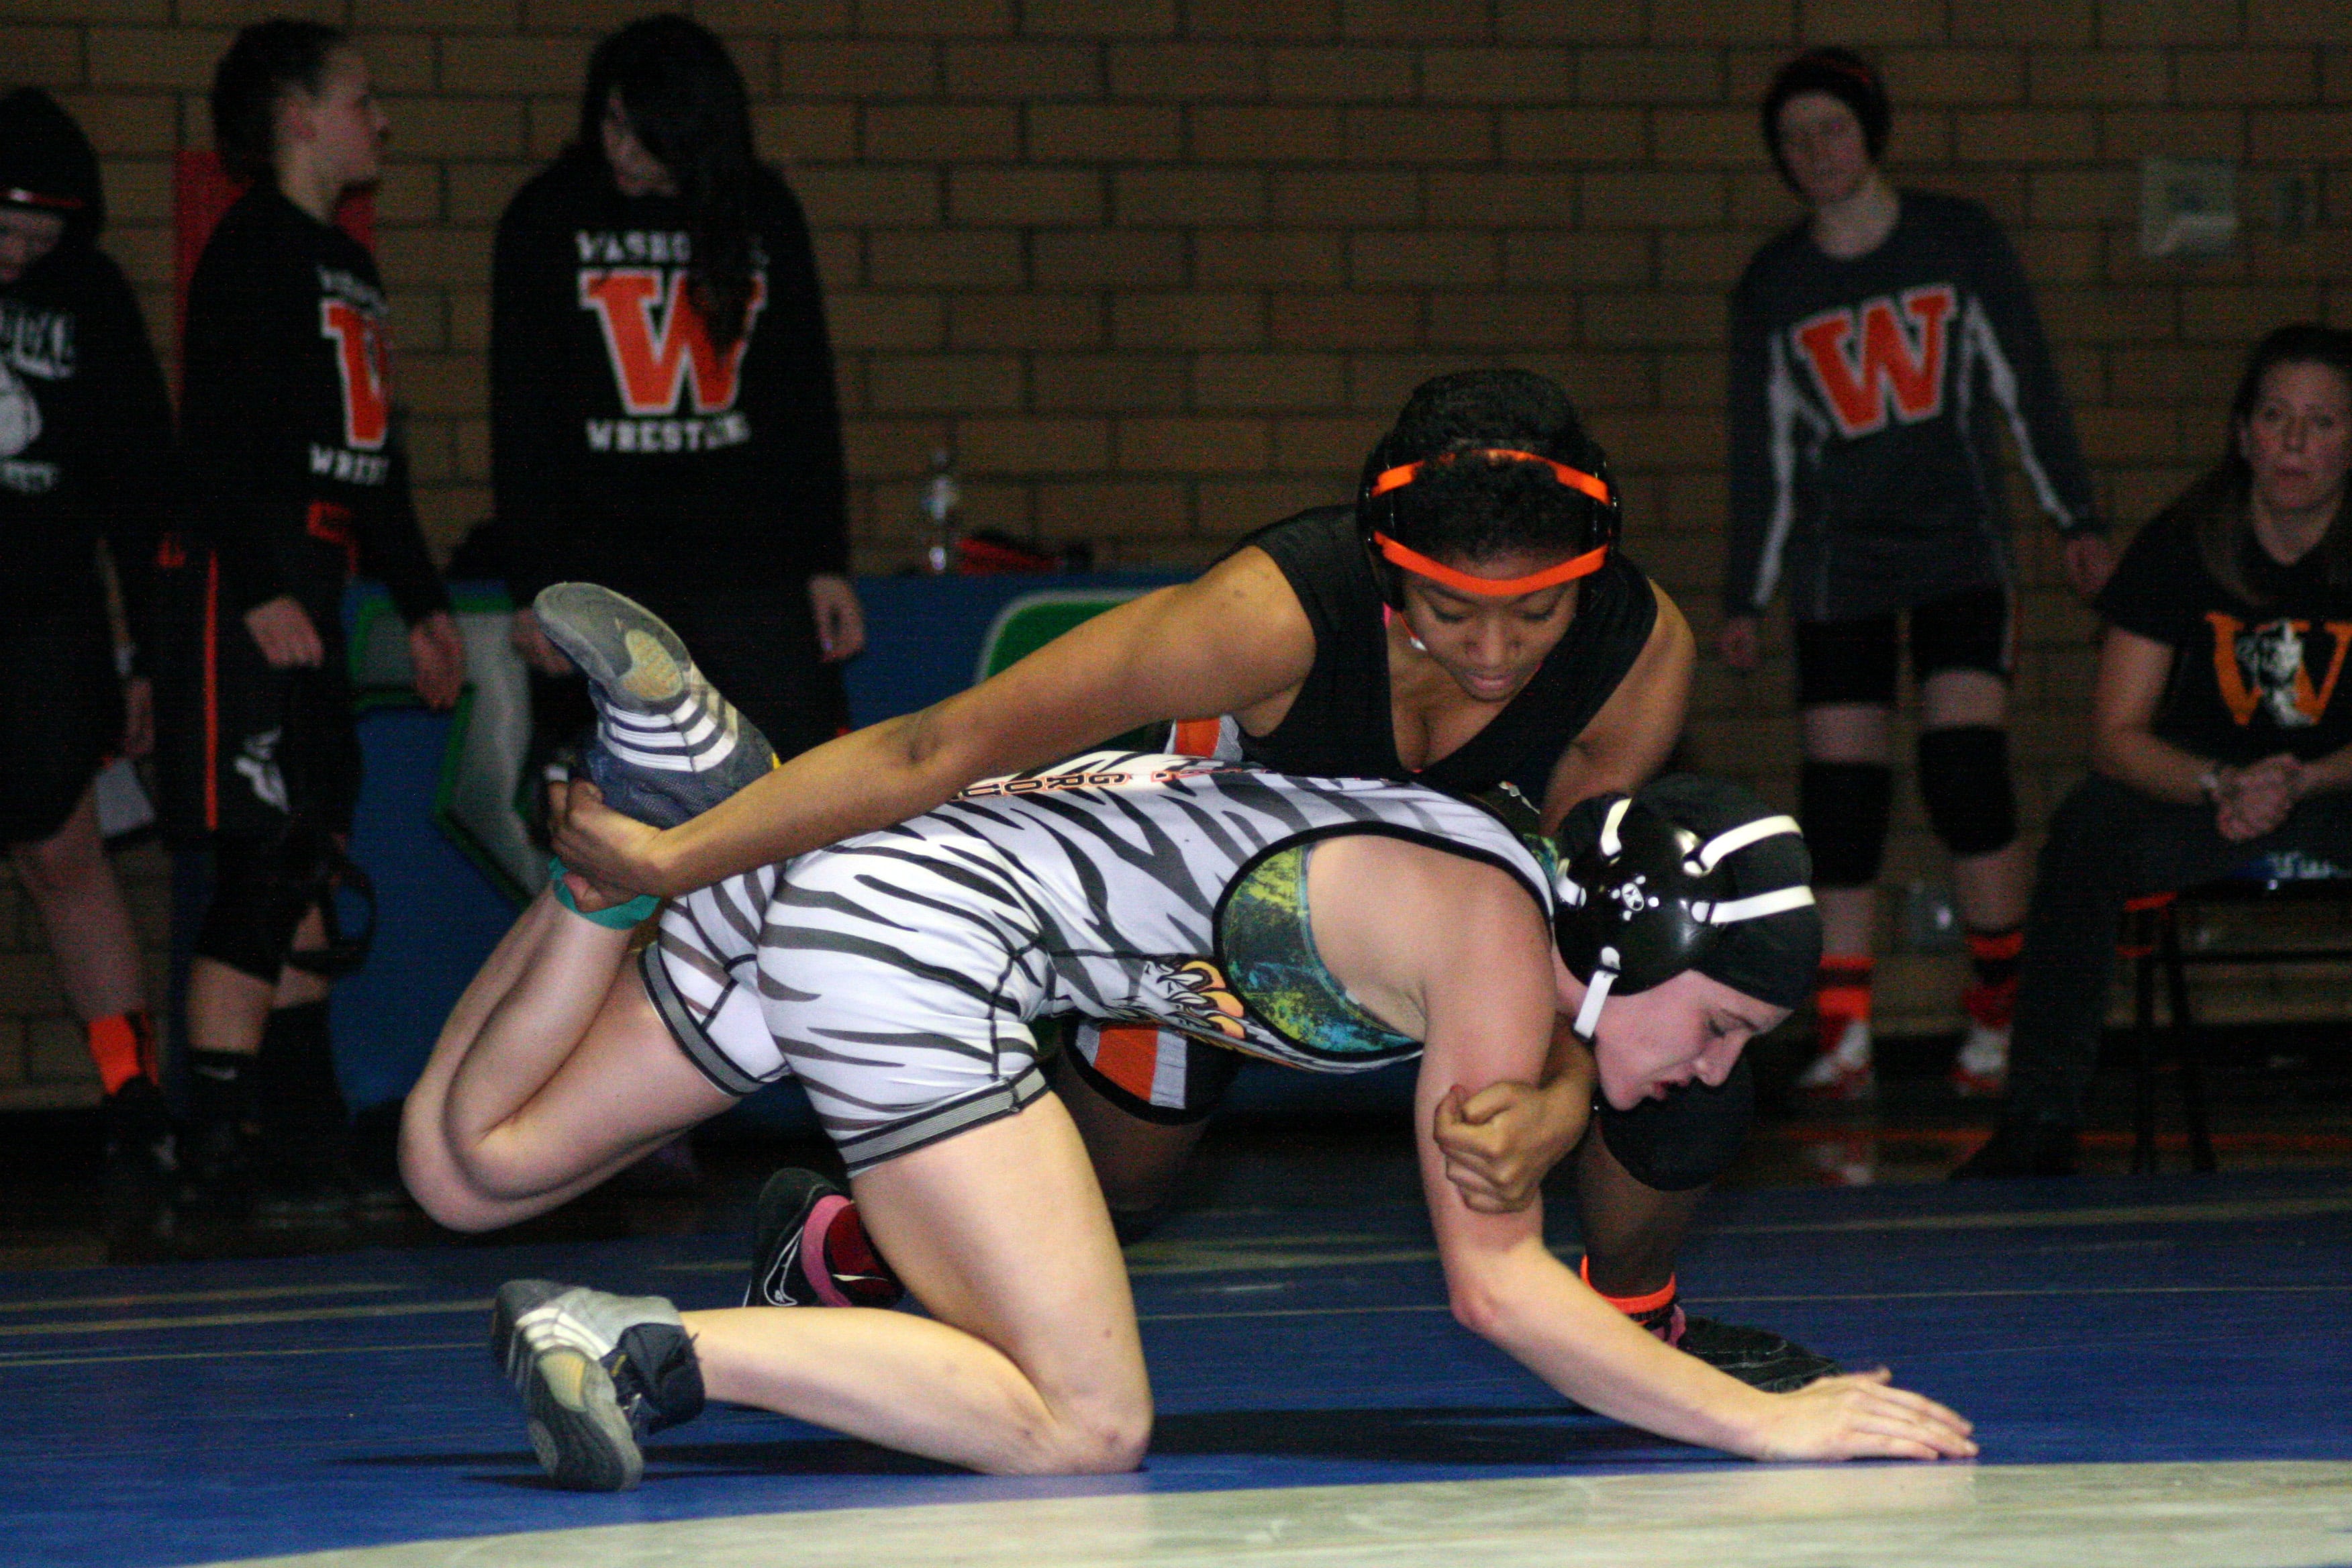 Emily Alder-Storm took second place at 112 pounds for Washougal.